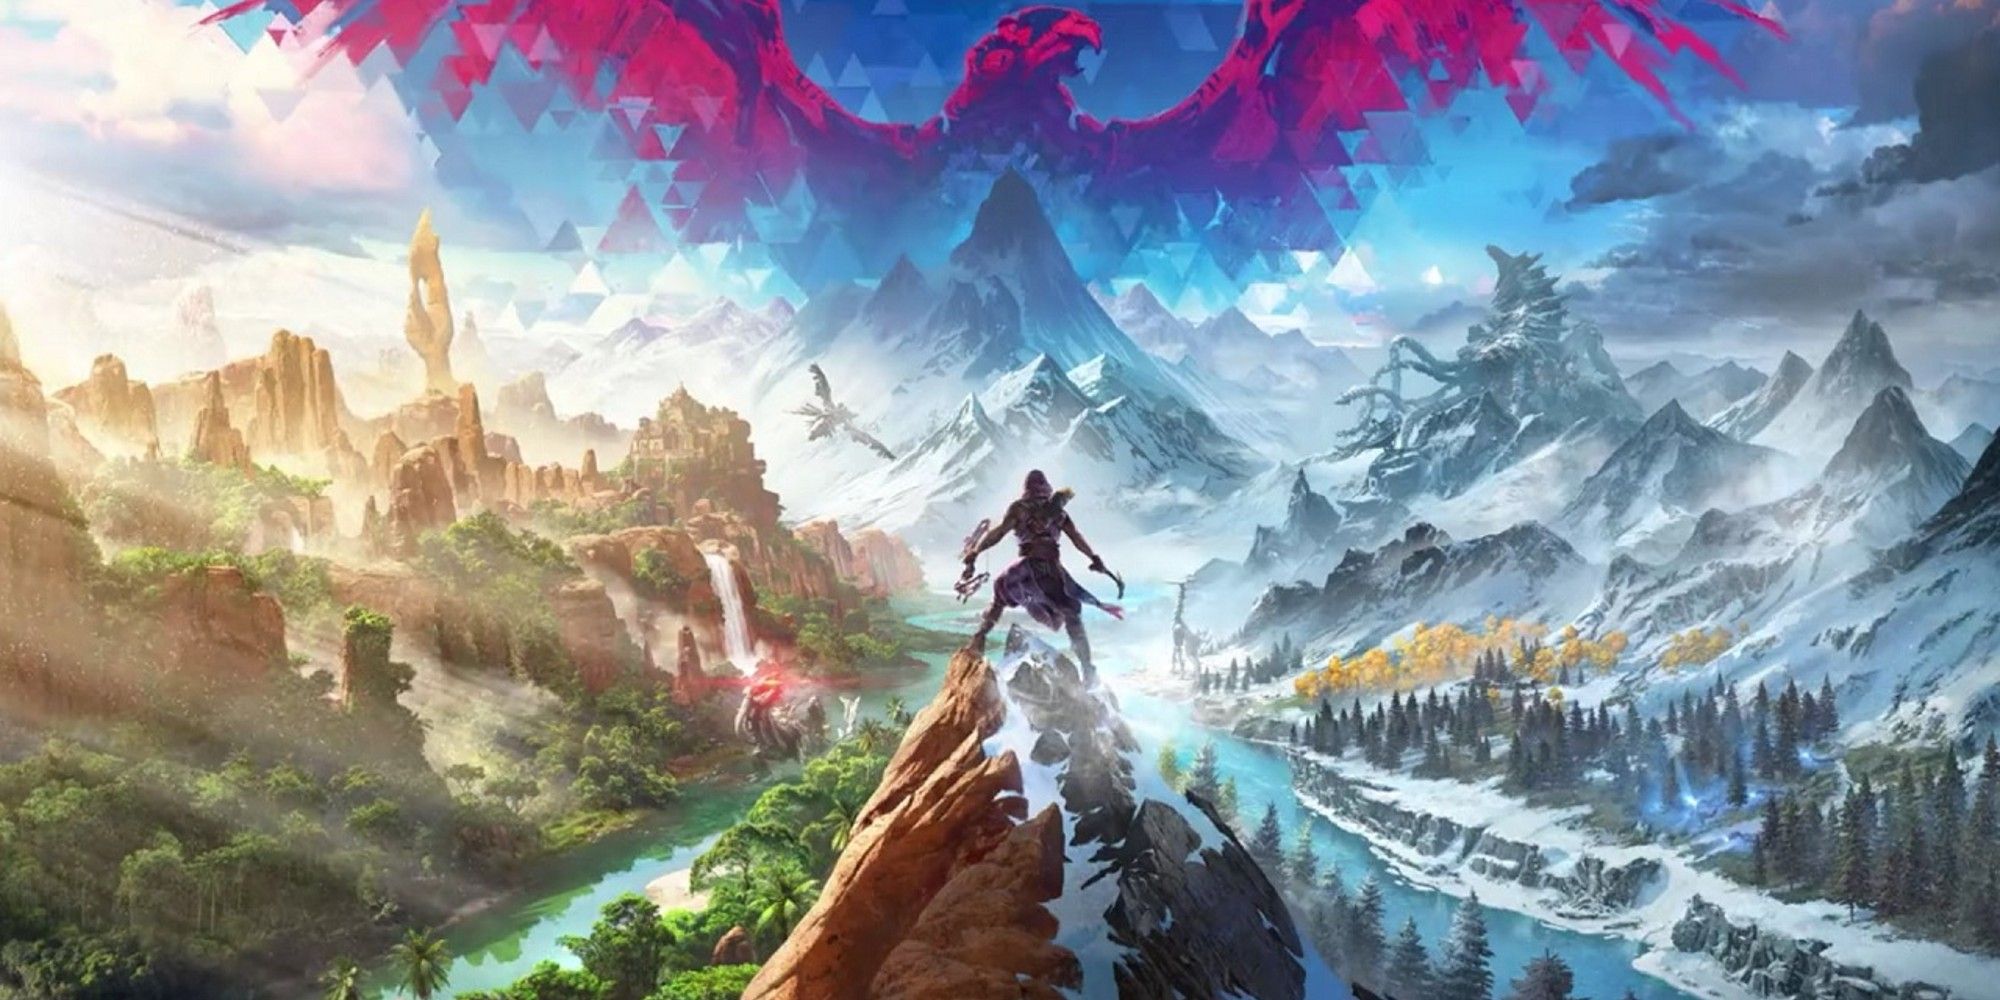 Horizon: Call of the Mountain cover art with Ryas at the center